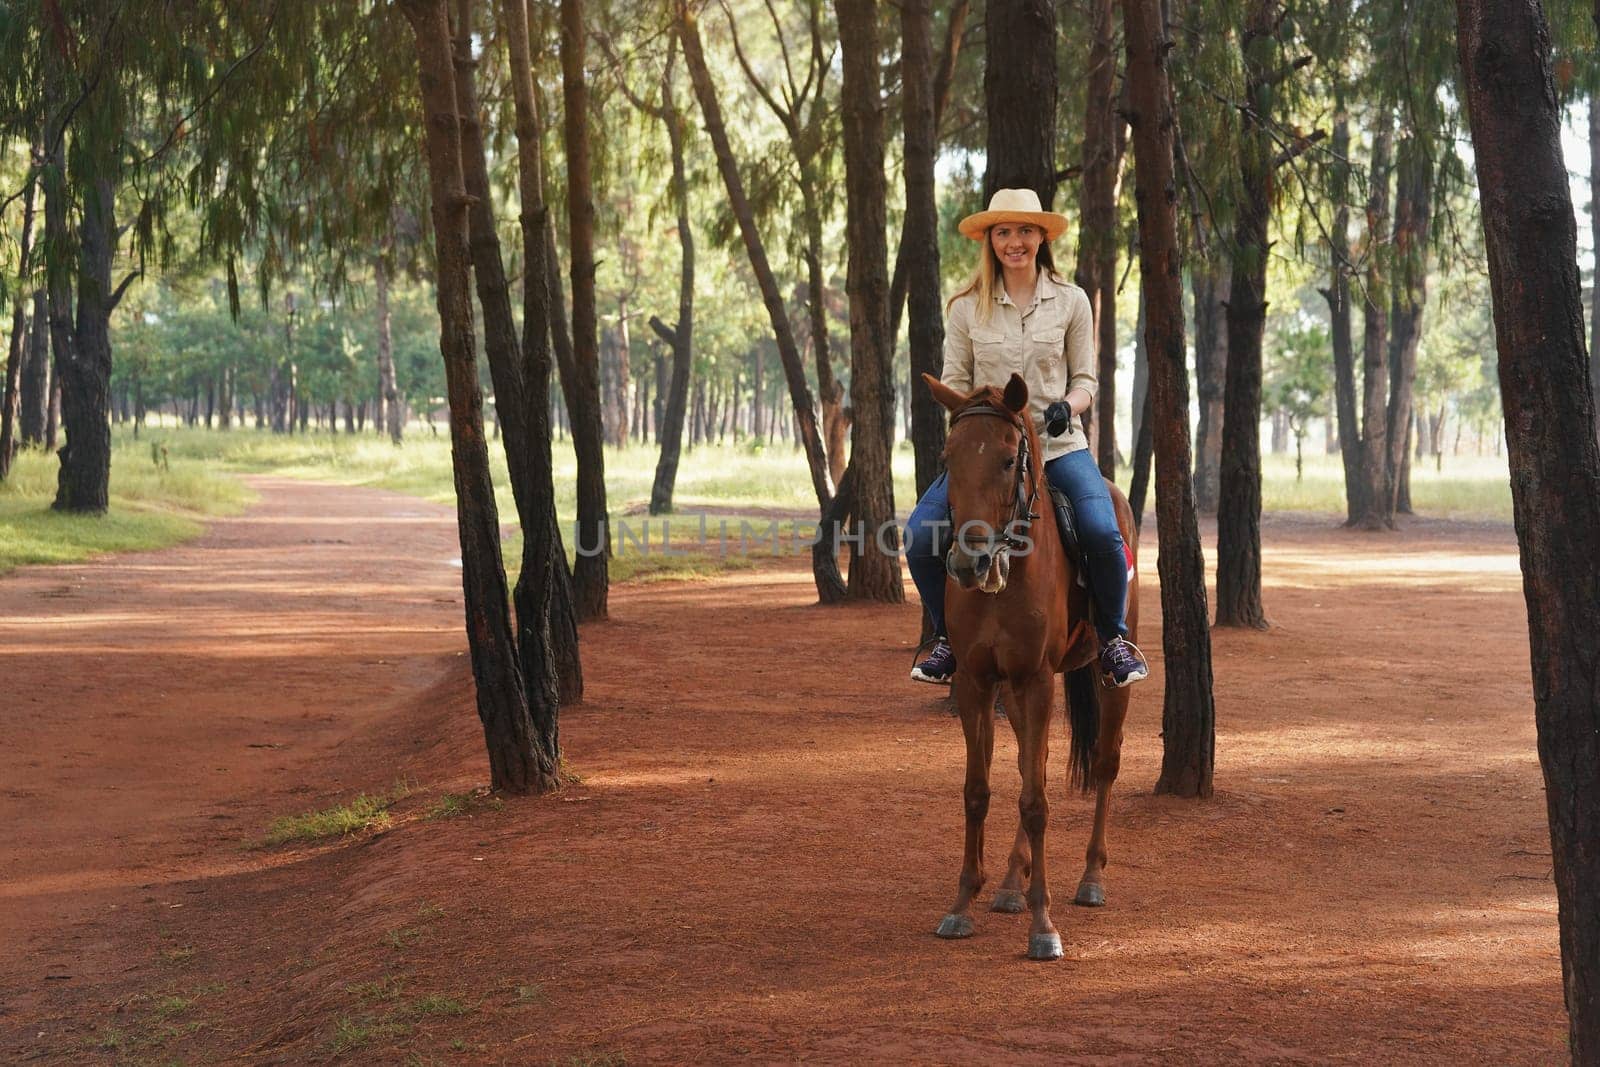 Young woman in shirt and straw hat, riding brown horse on park path, smiling, blurred trees in background